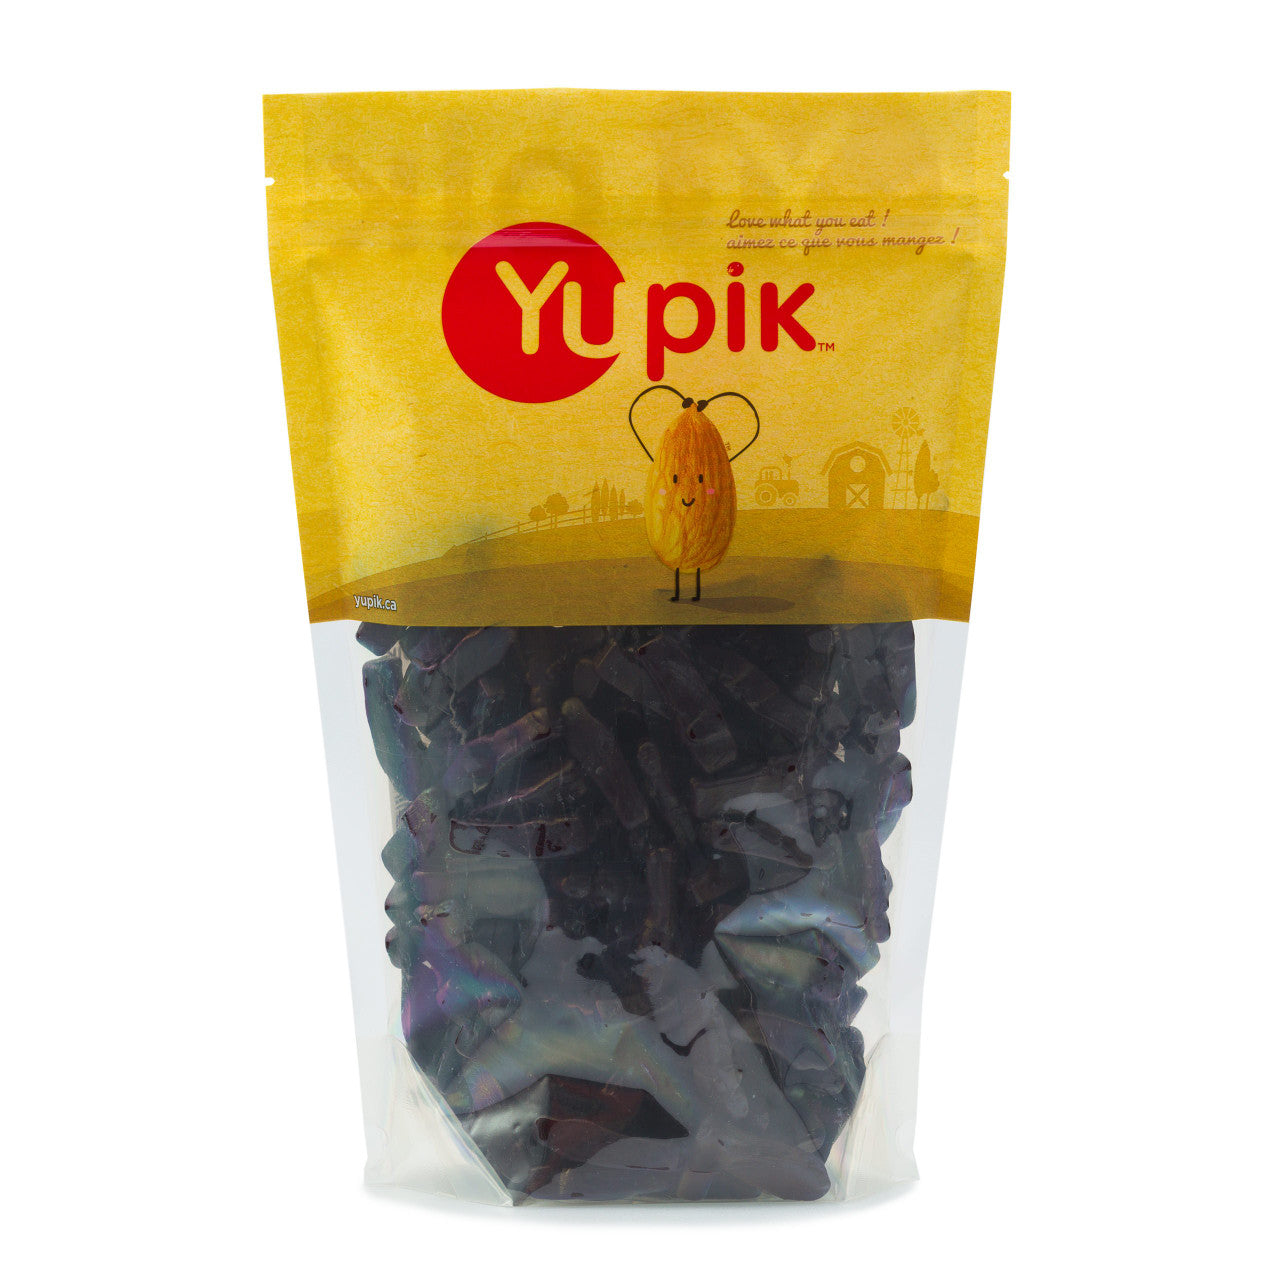 Yupik Licorice Babies, 1Kg/35.27 Ounces {Imported from Canada}